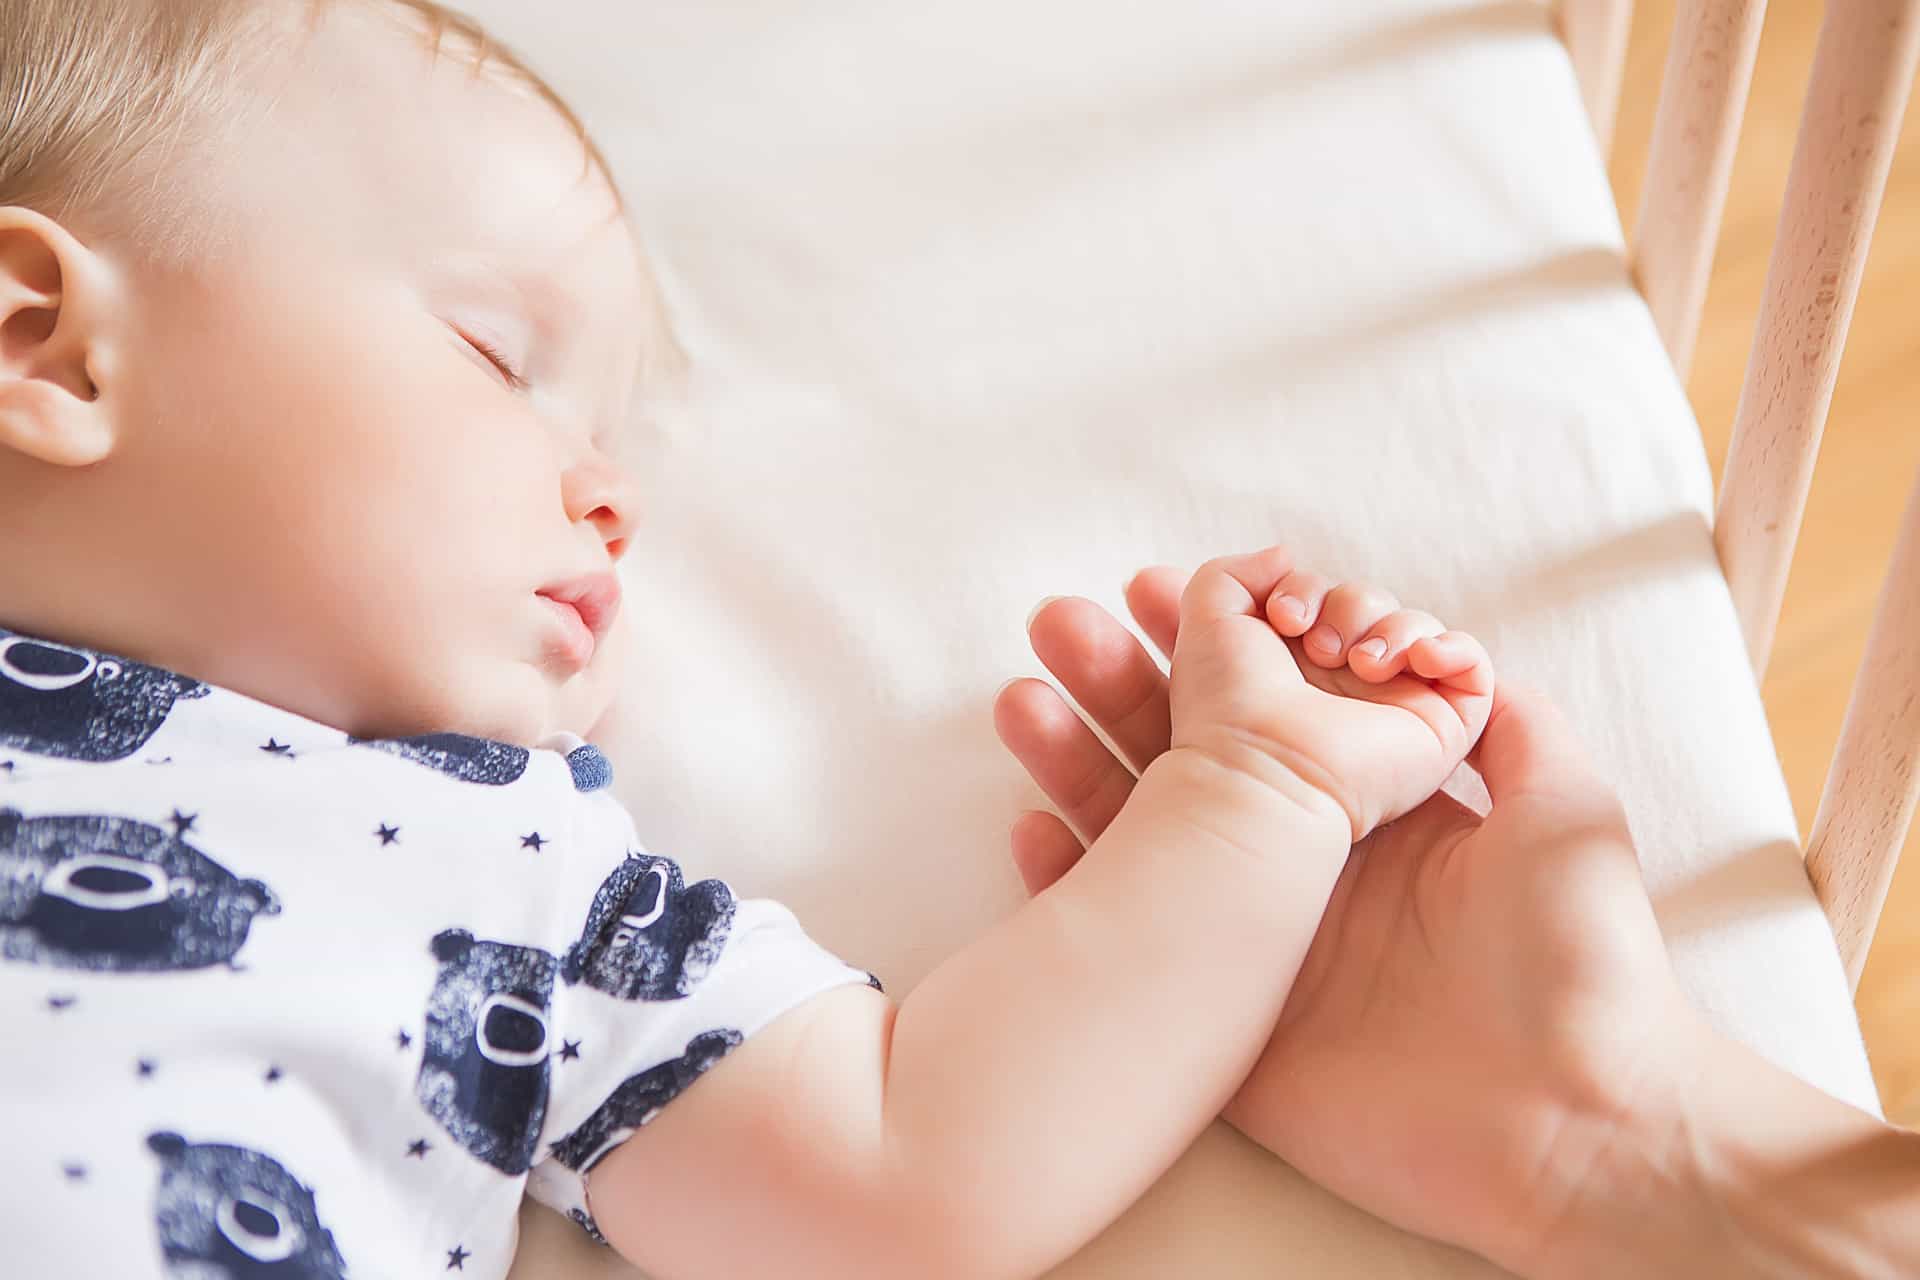 Peaceful adorable baby sleeping on his bed in a room. Soft focus. Sleeping baby concept. year-old babyboy sleeps at home close up. Mum holds by the hand her sleeping child